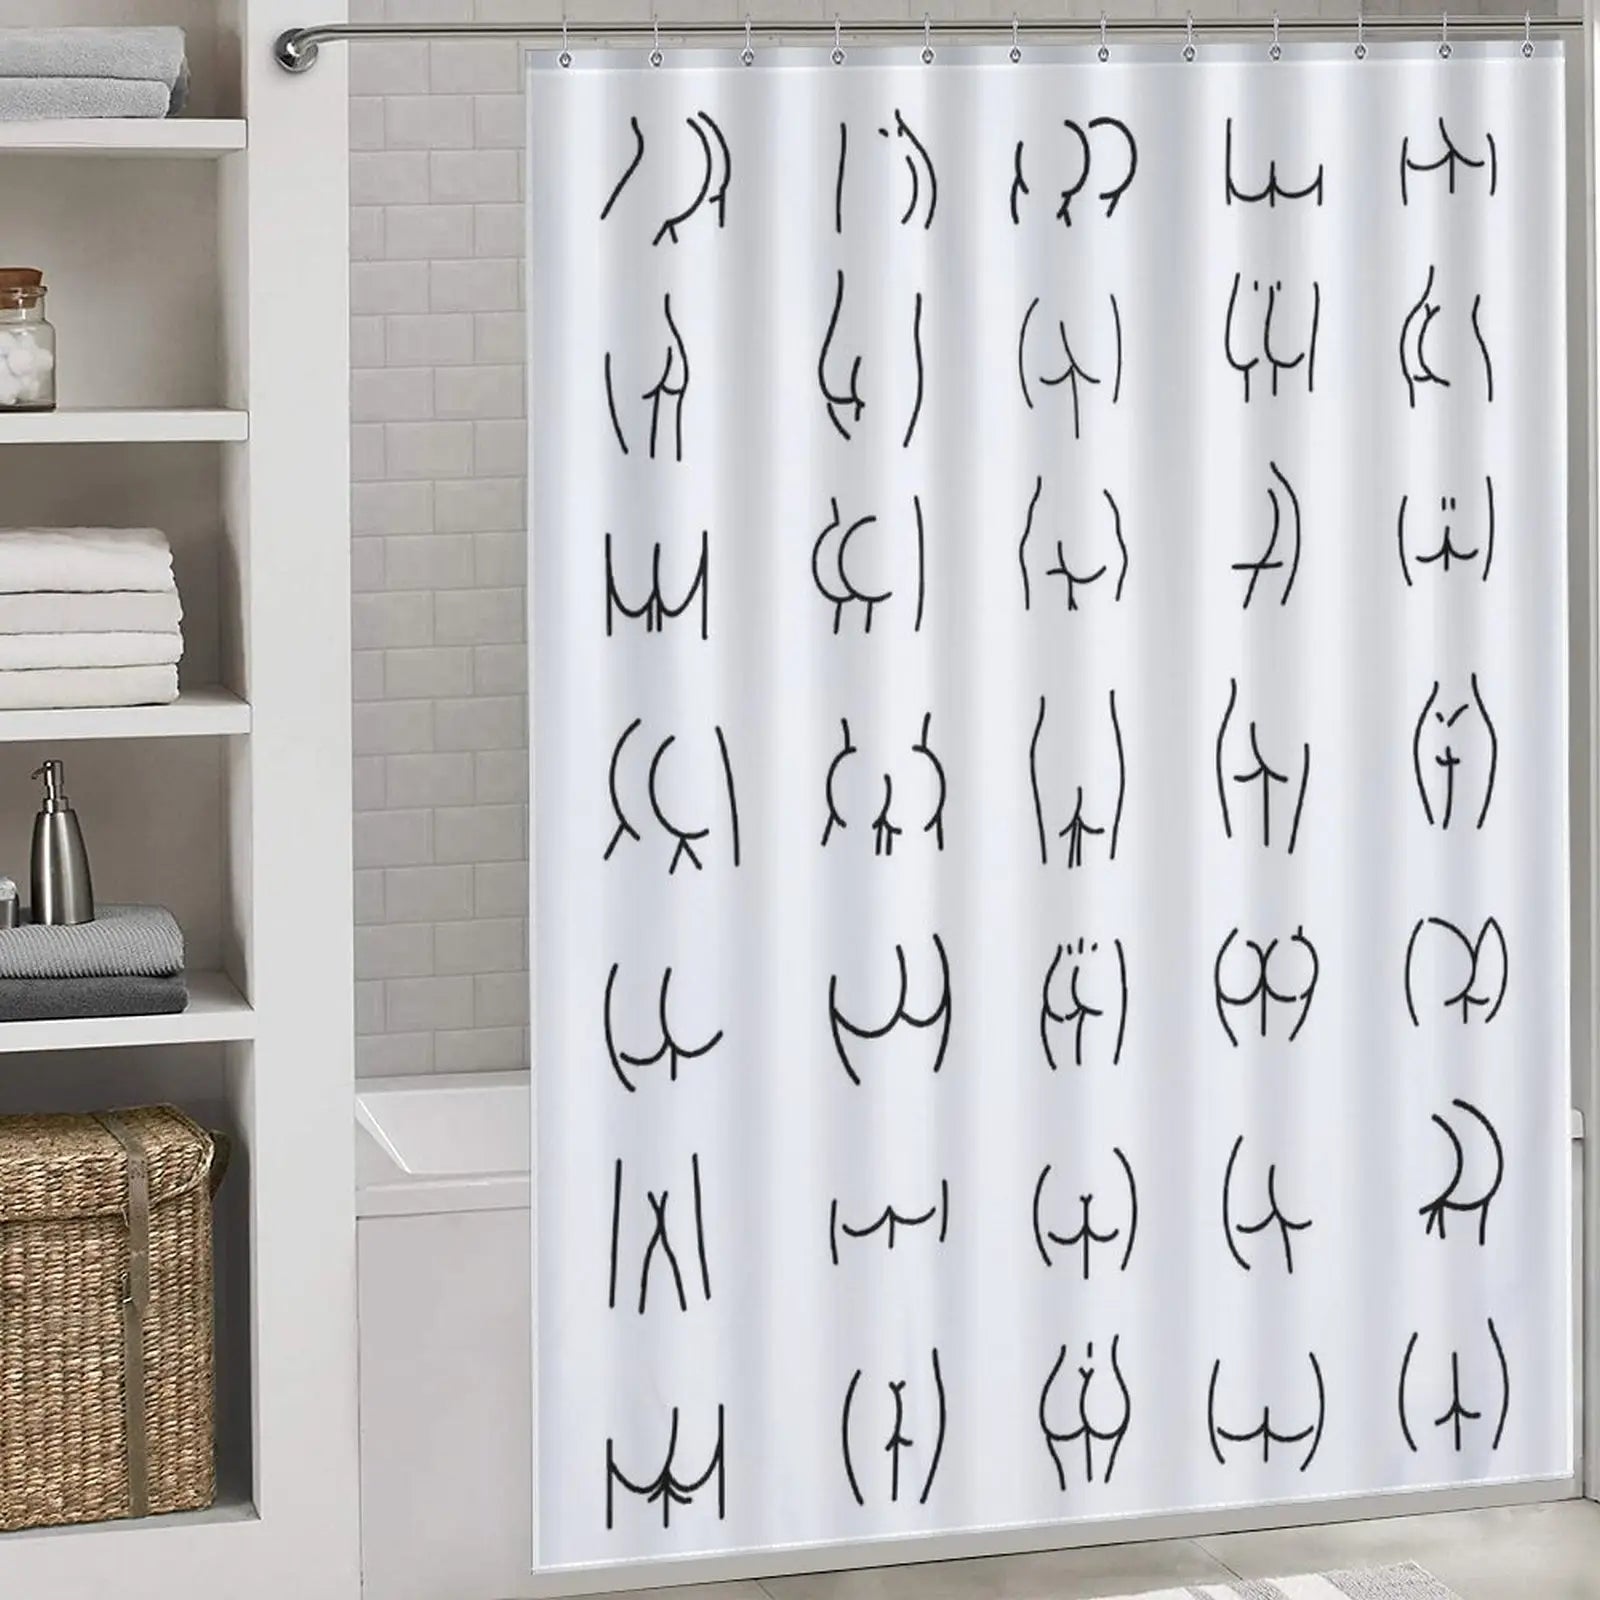 A Funny Butt Shower Curtain-Cottoncat adorned with an array of quirky drawings by Cotton Cat.